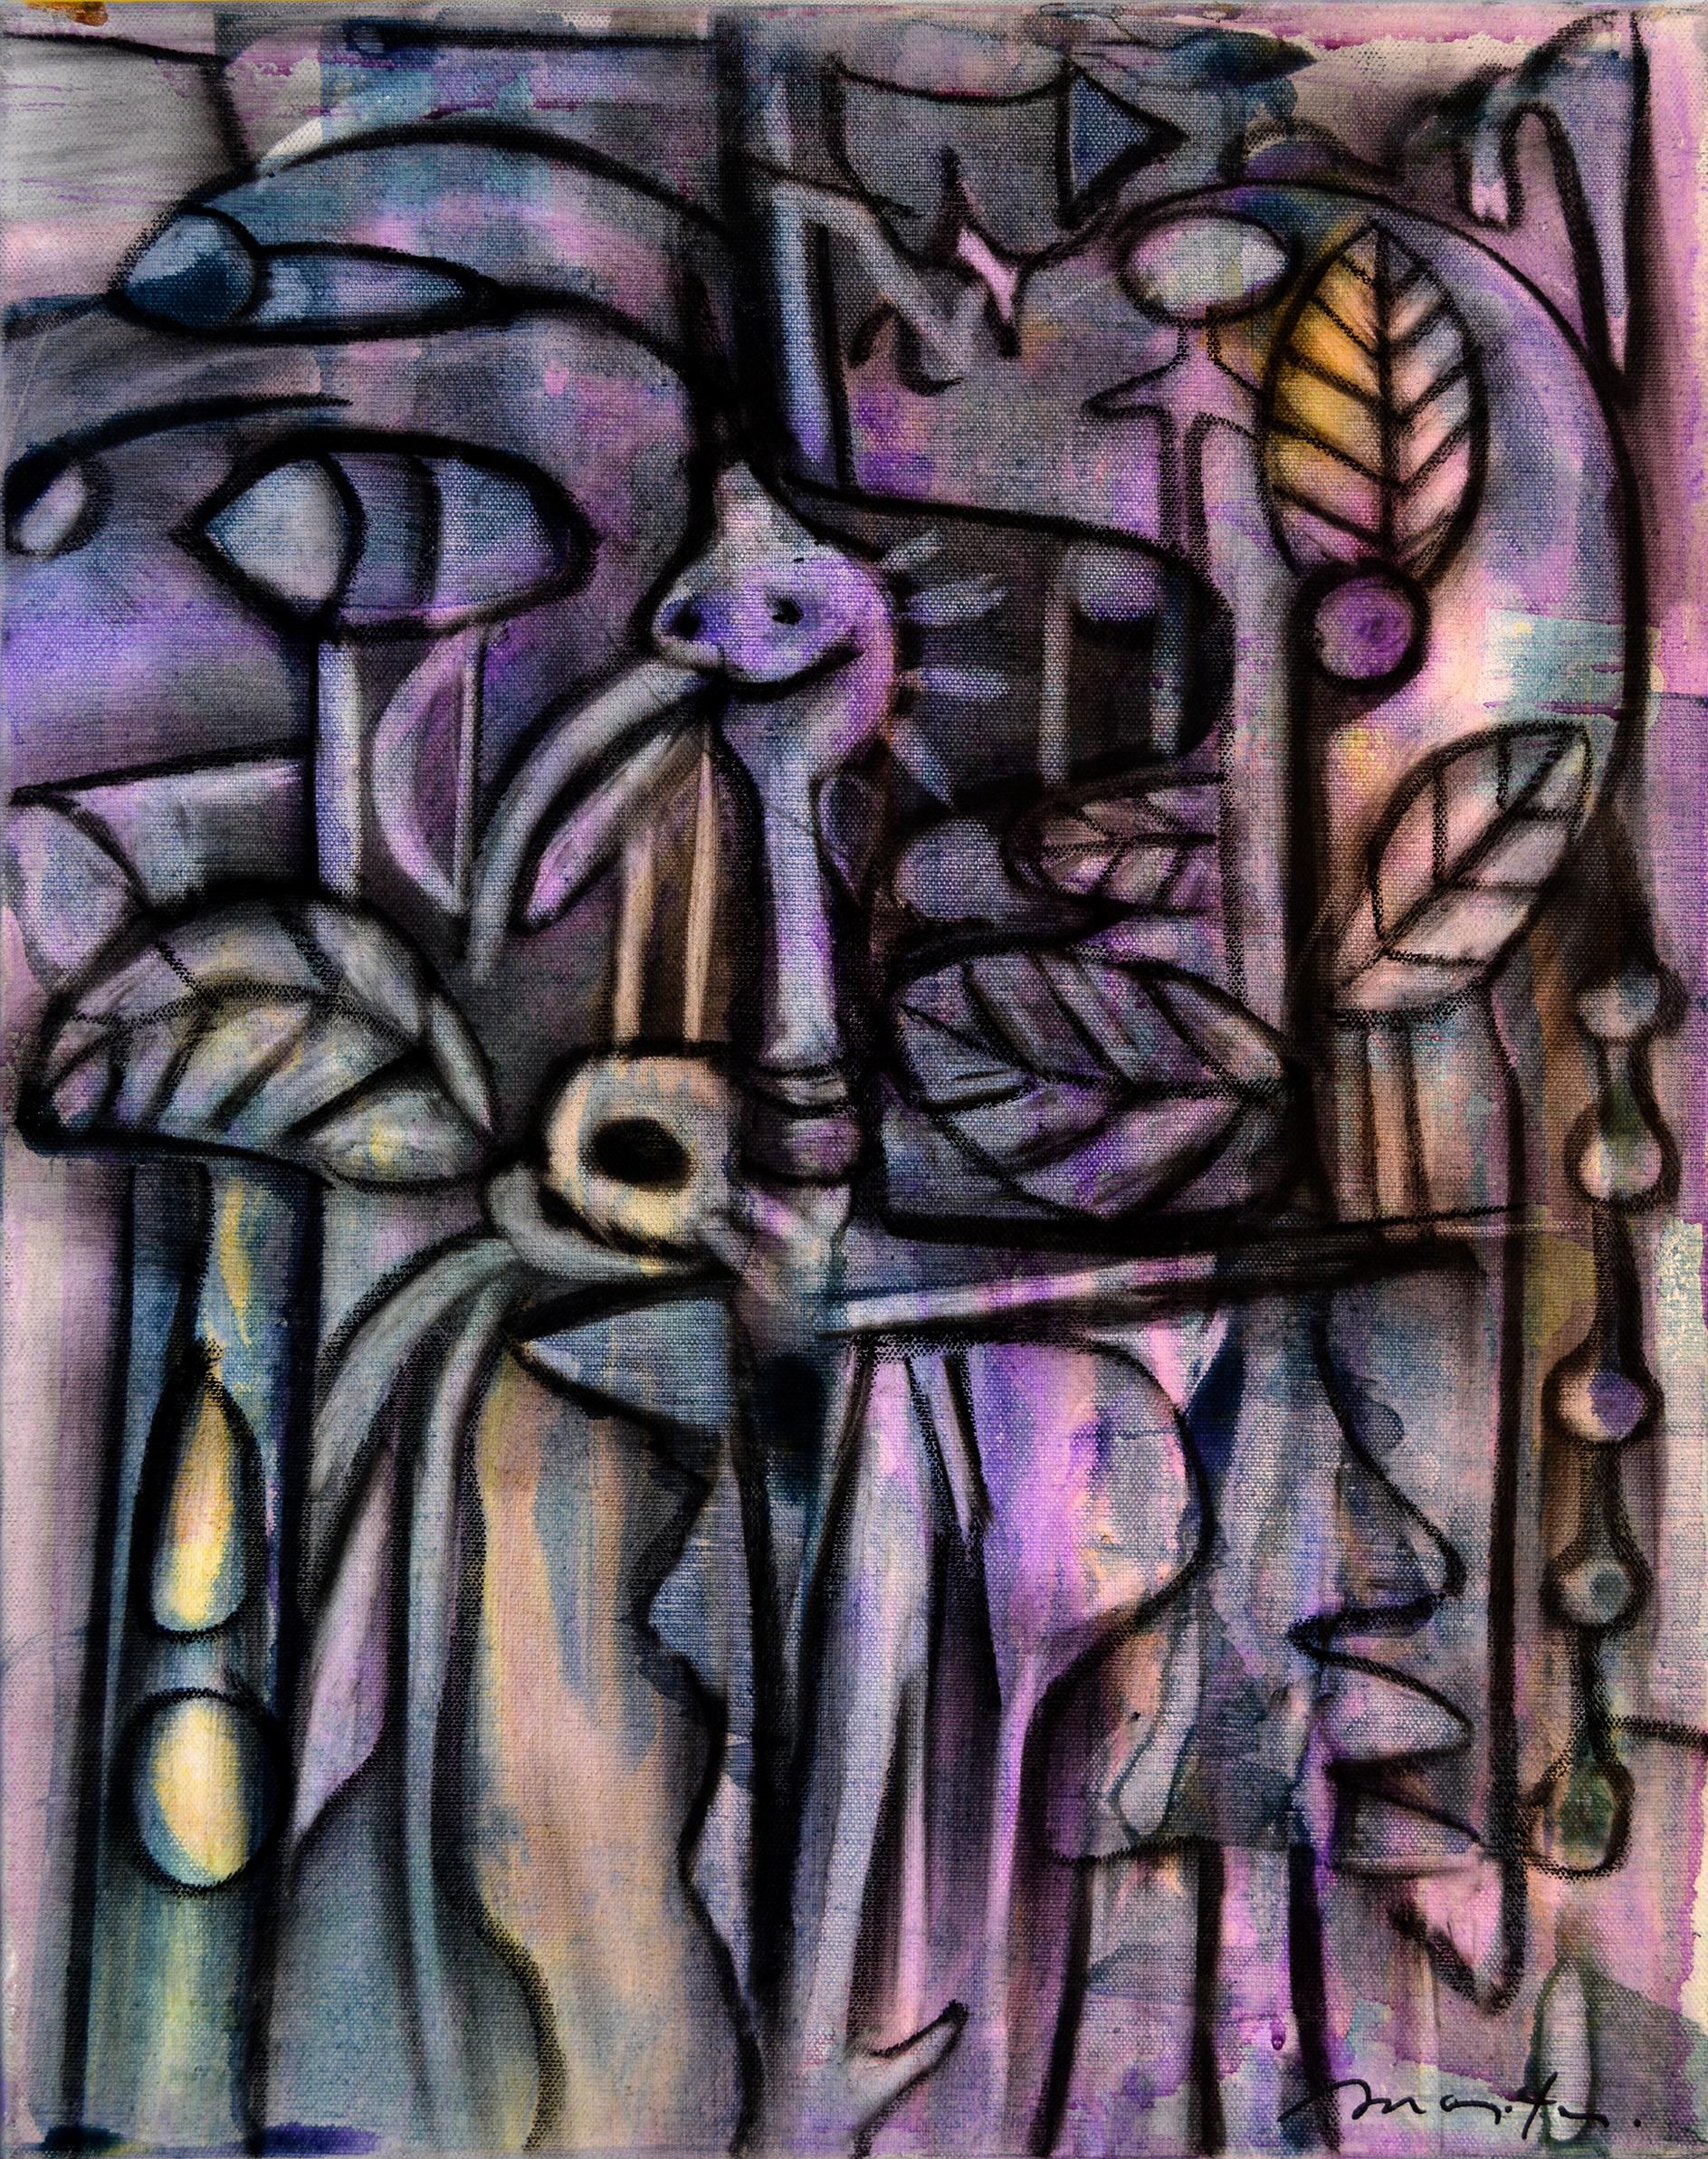 Rolando Duartes Figurative Painting - Jungle, Contemporary Abstract Art Acrylic Charcoal Painting Canvas Purple Black